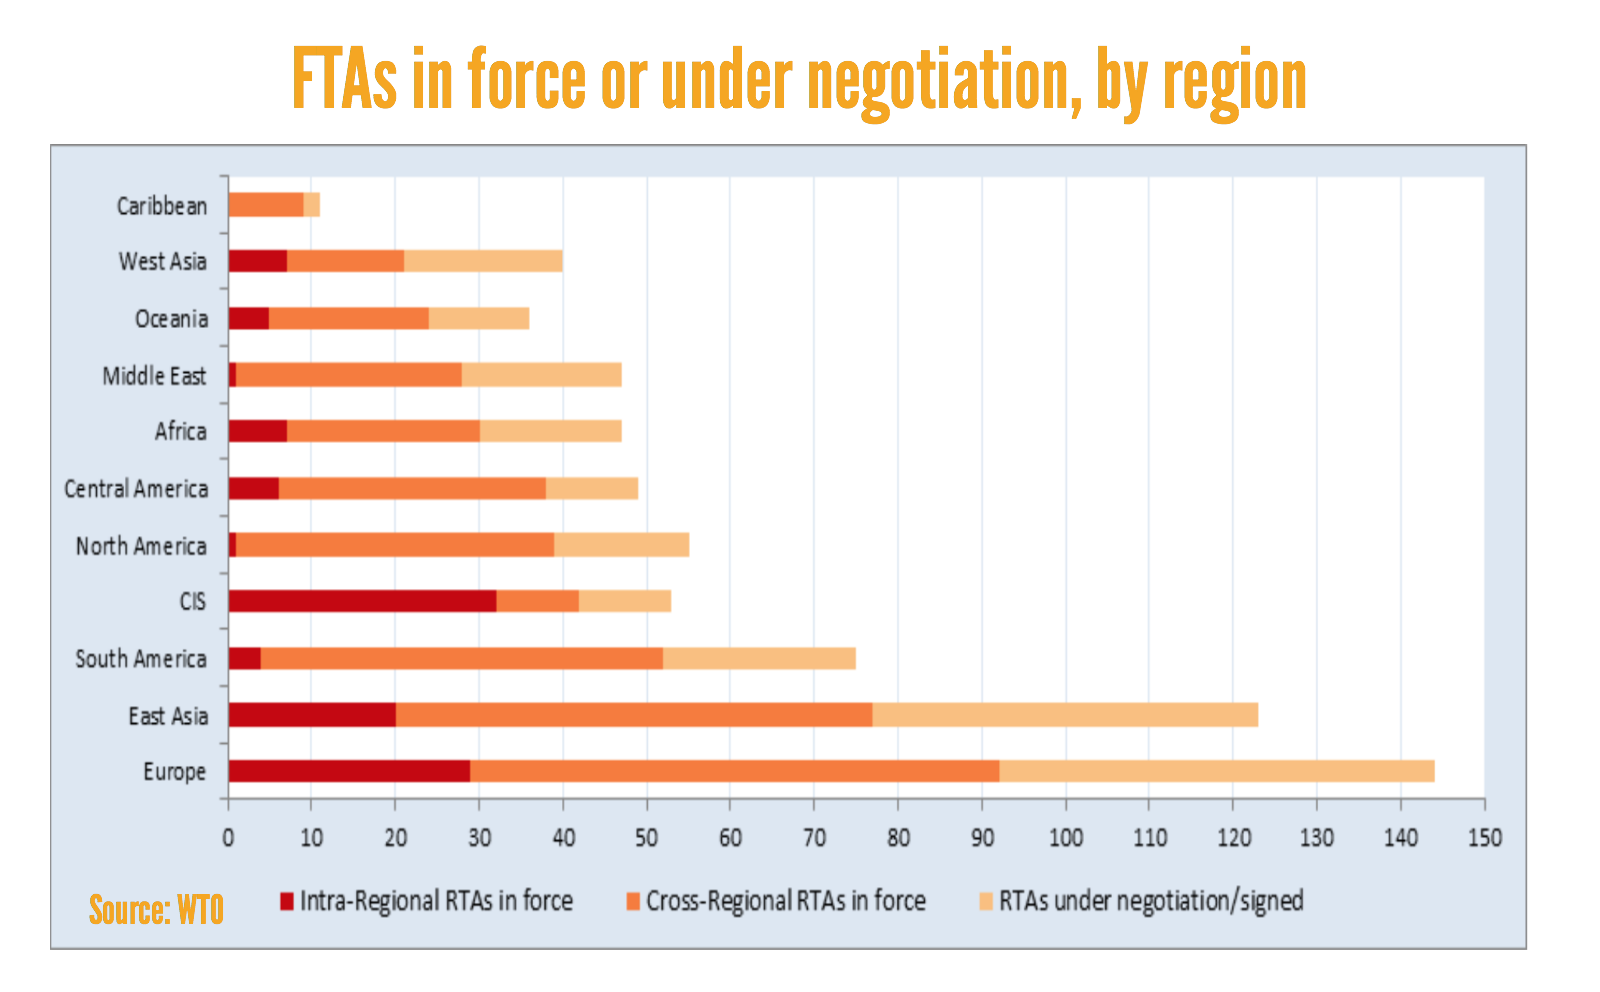 Free trade agreements in force or under negotiation by region